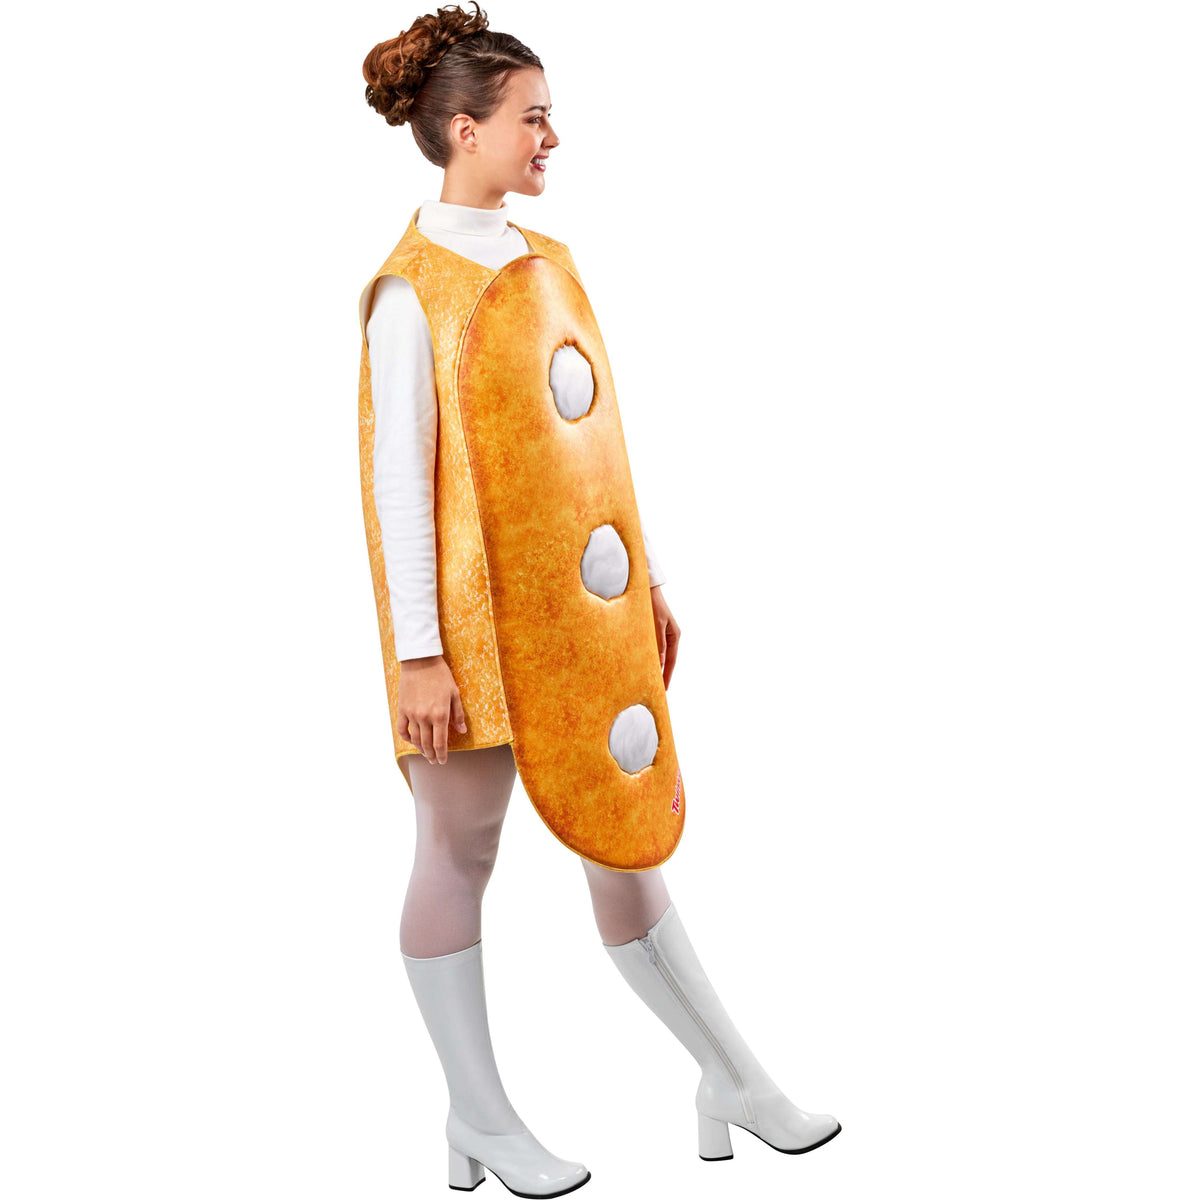 Hostess Twinkie One-Size-Fits-Most Adult Costume